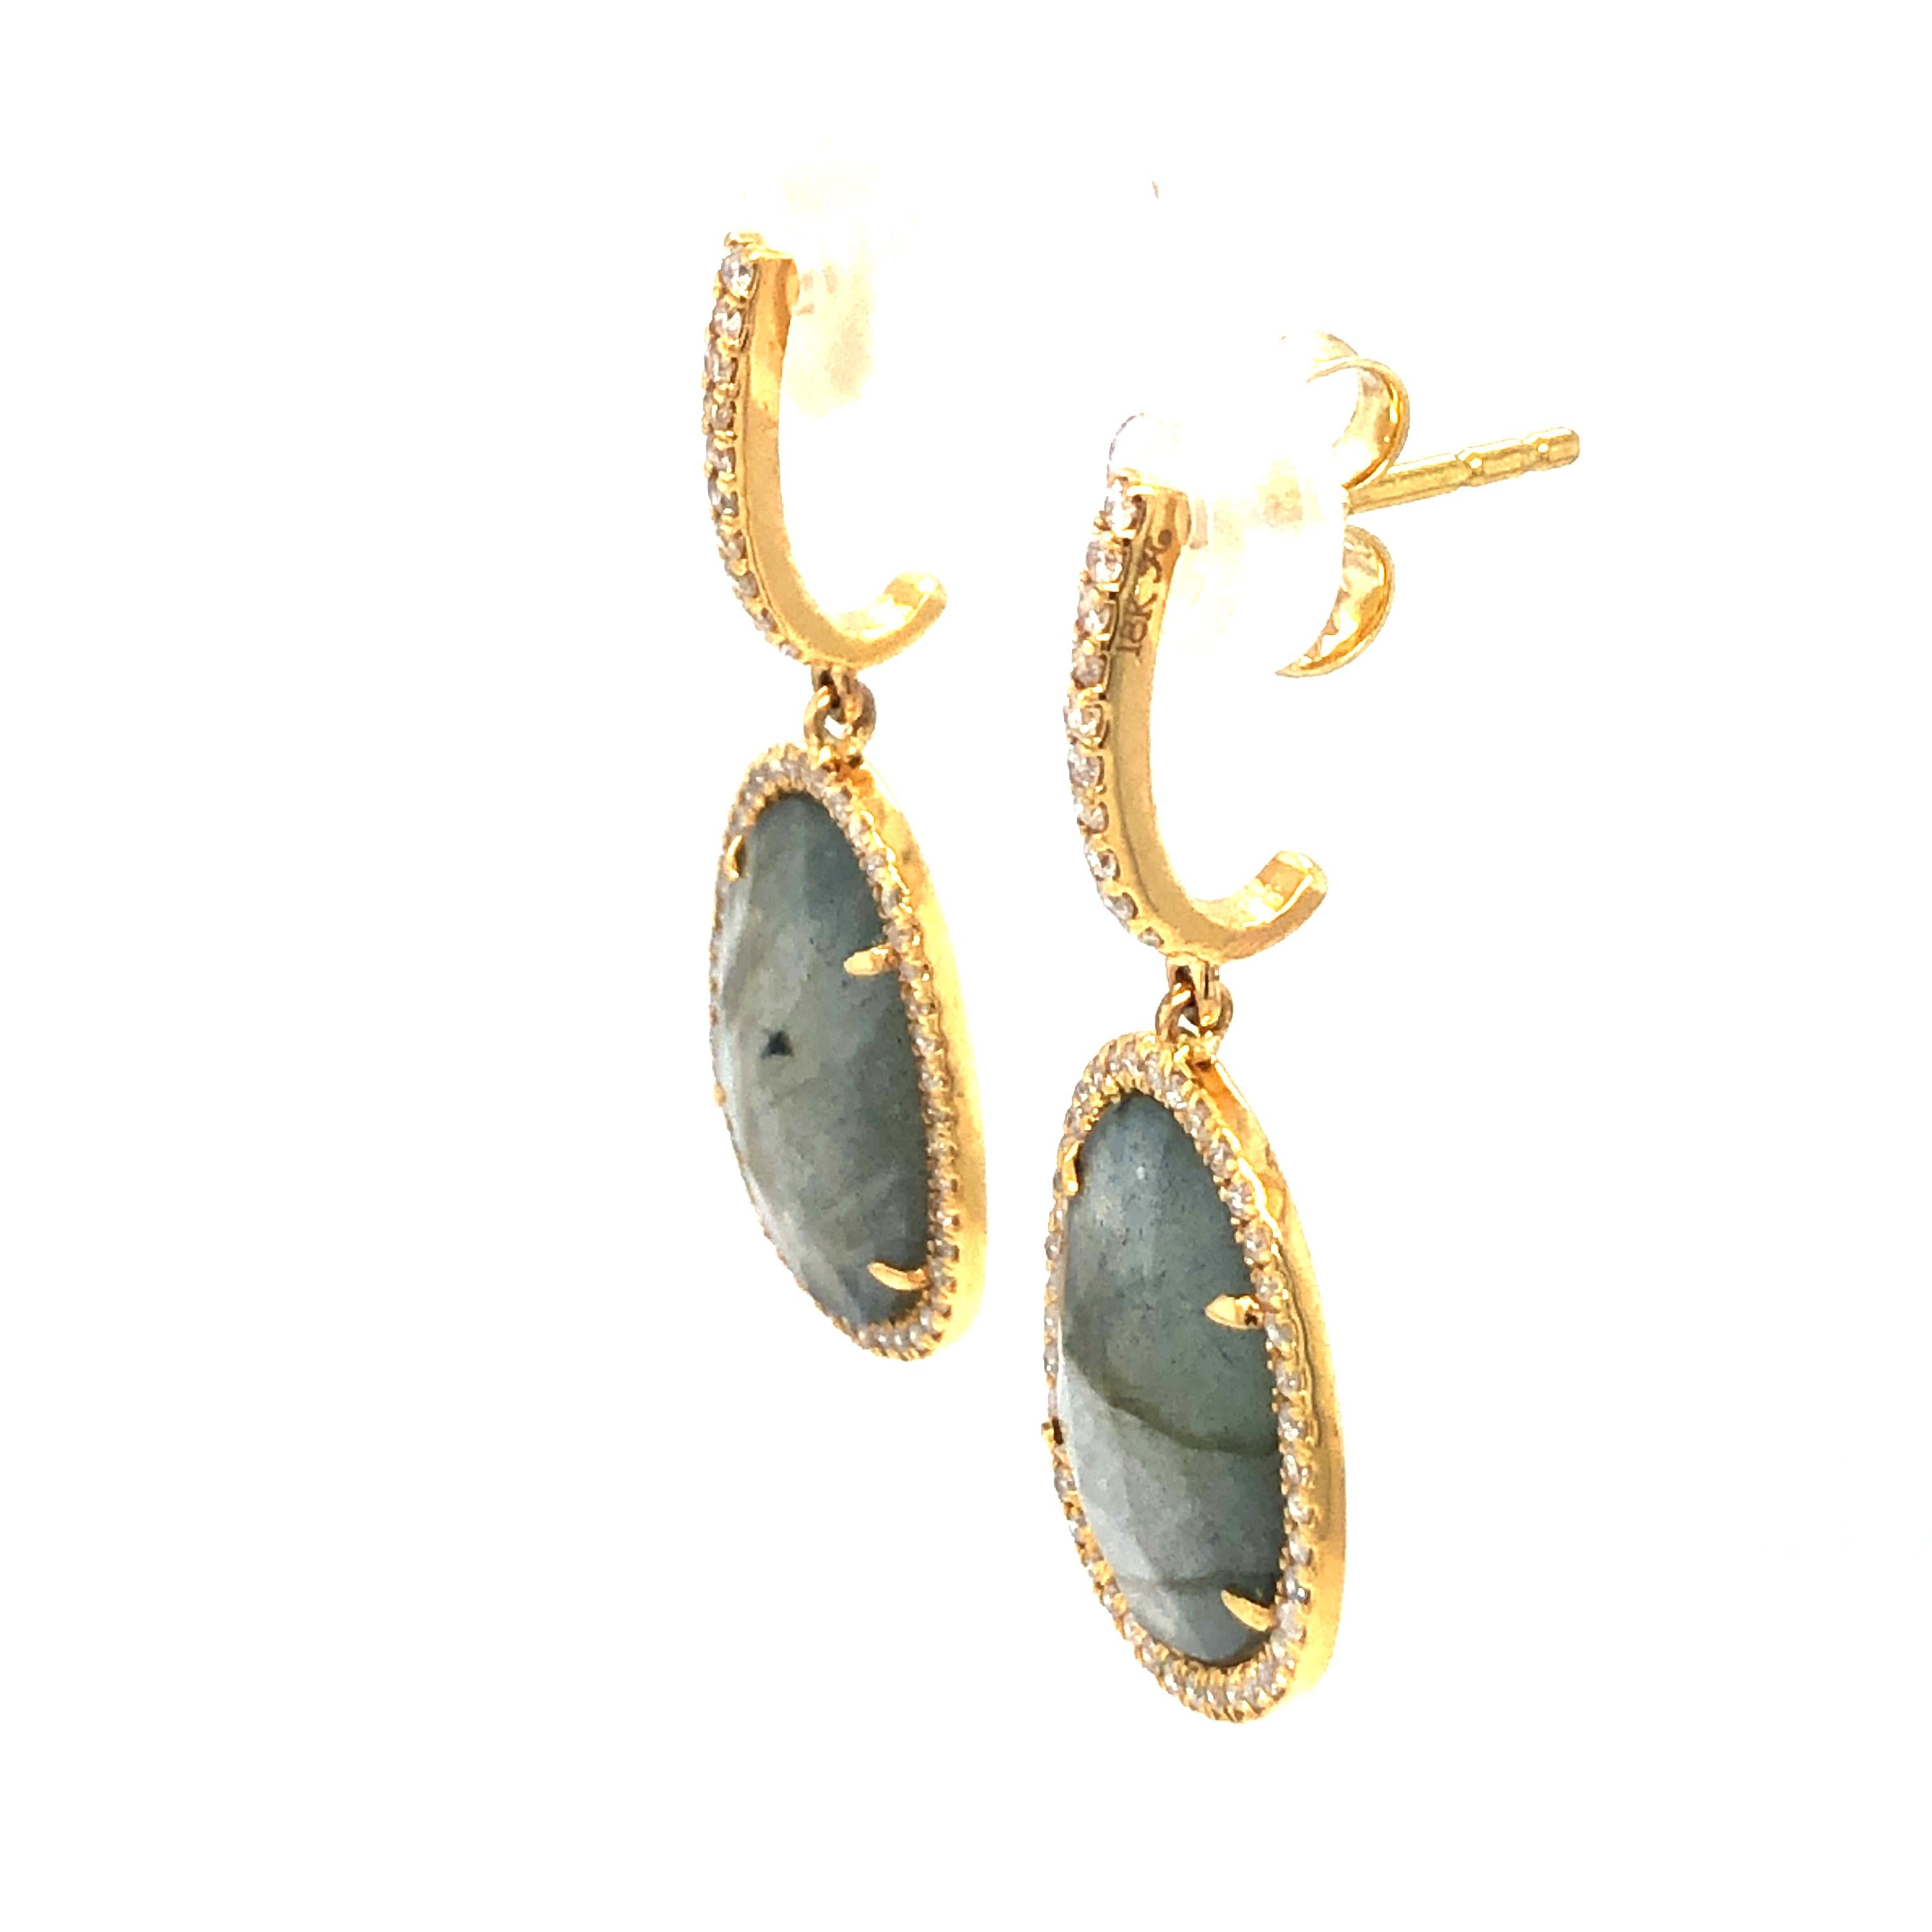 Labradorite Diamond Earrings 18K Yellow Gold In New Condition For Sale In Dallas, TX